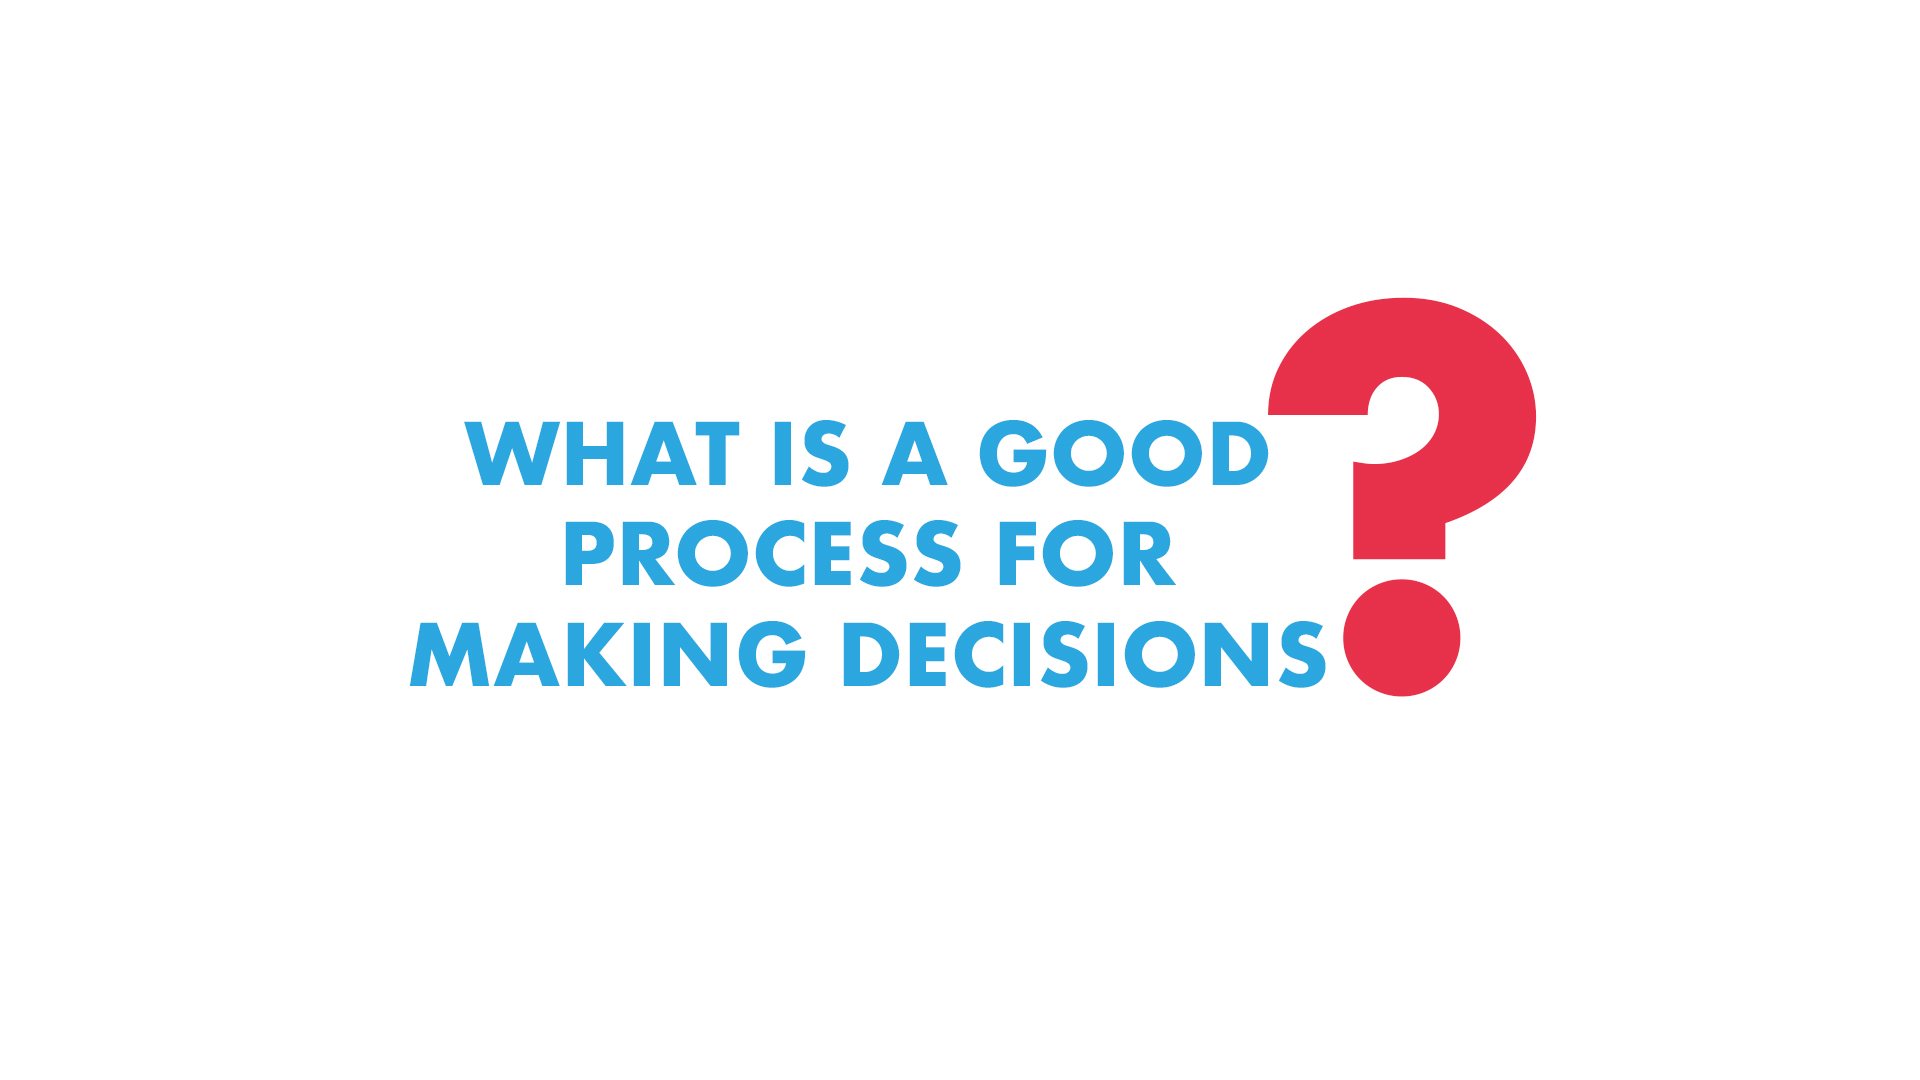 What is a Good Process for Making Decisions?